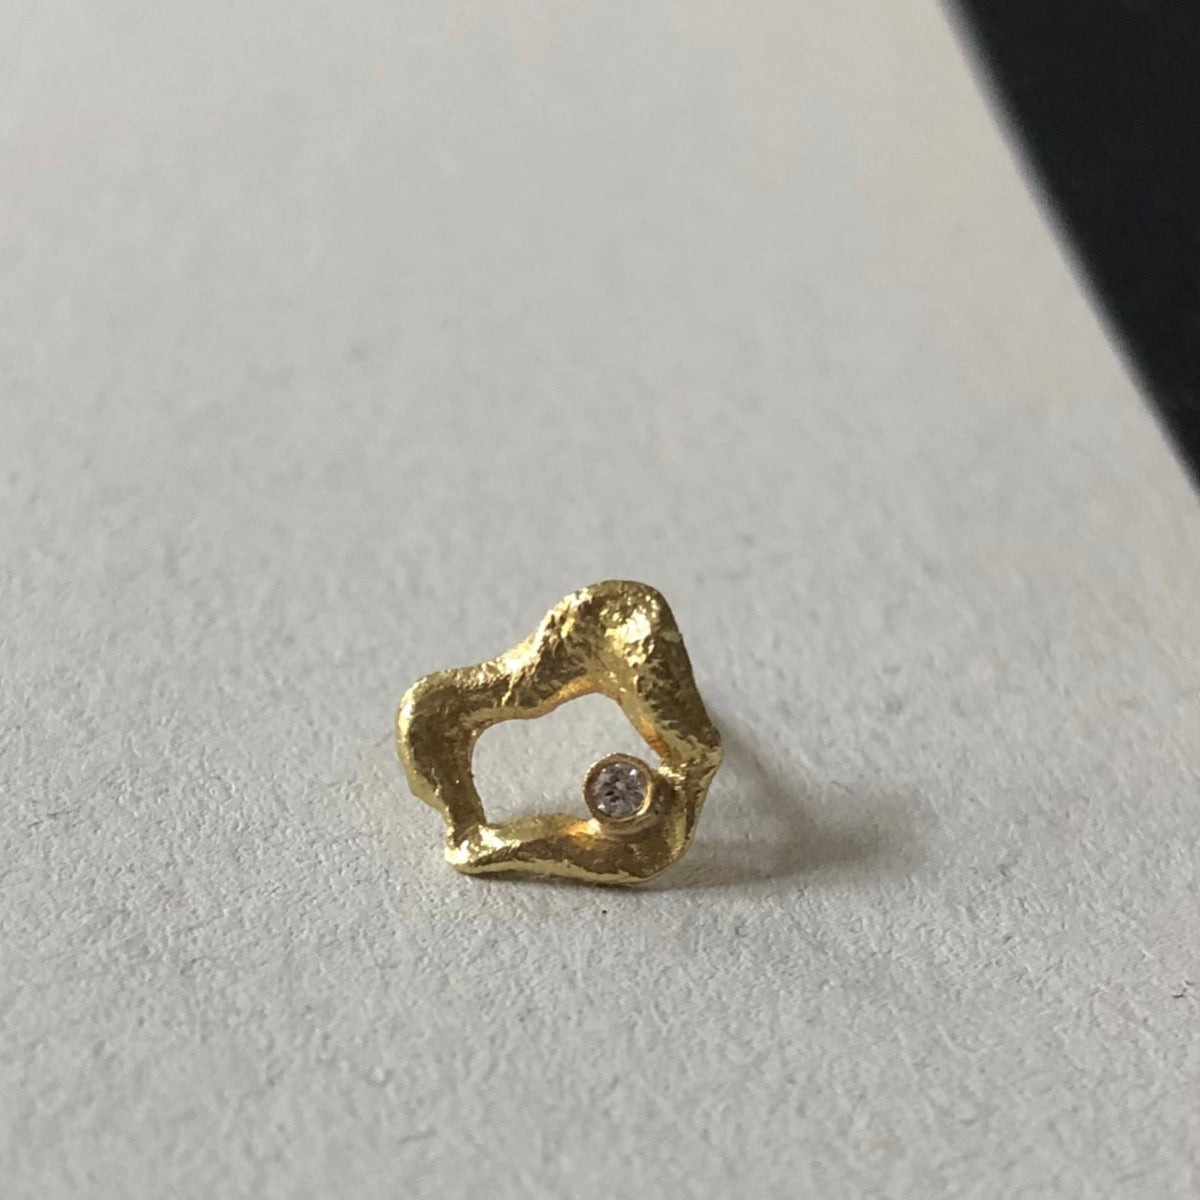 Lava single stud earrings no.2 in 18 kt. gold and a diamond